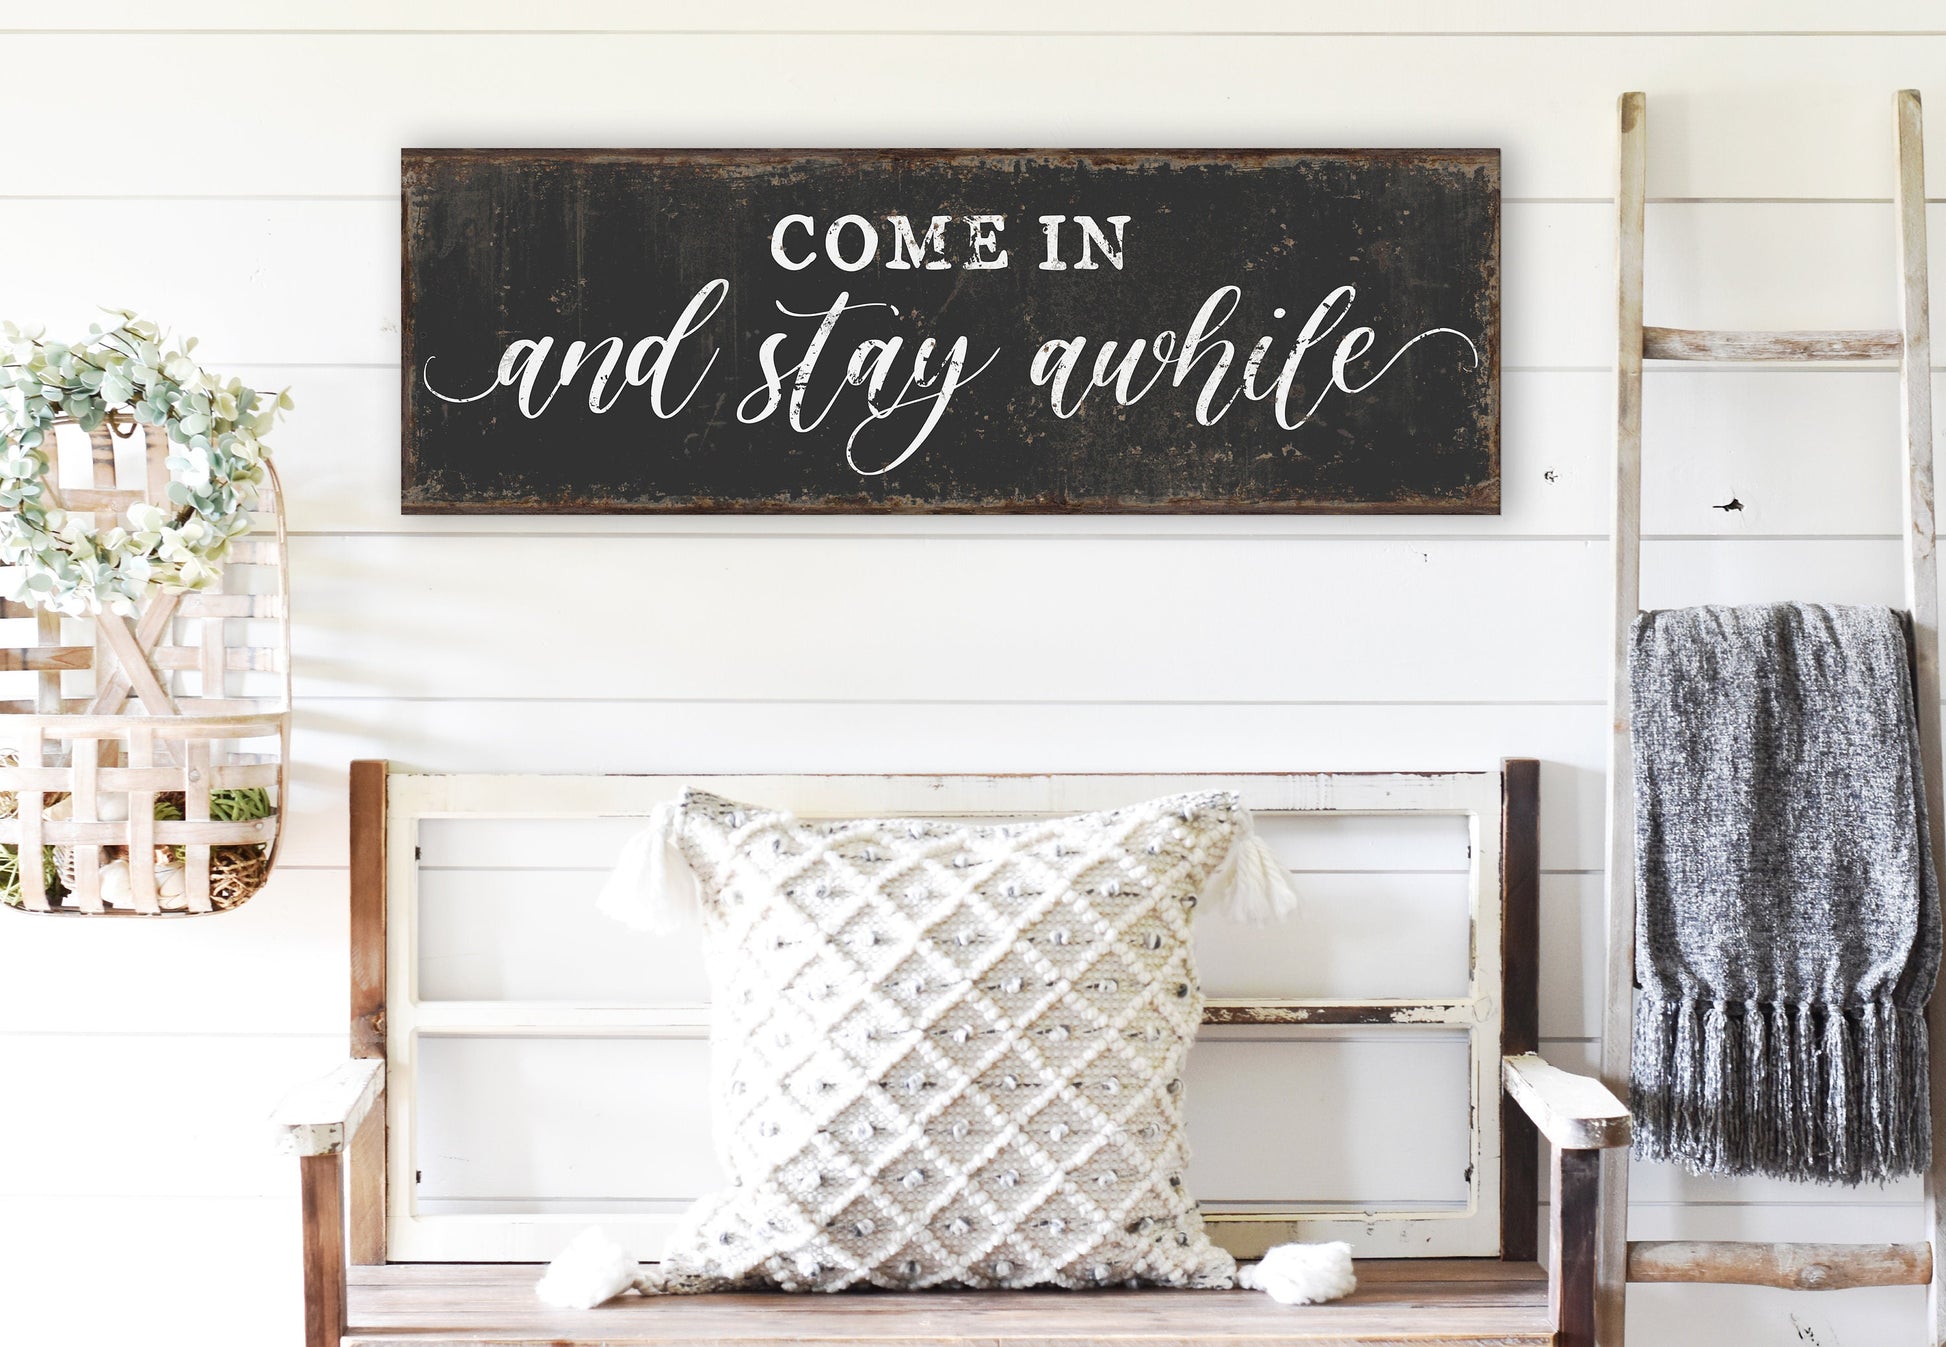 Farmhouse Décor is Here to Stay